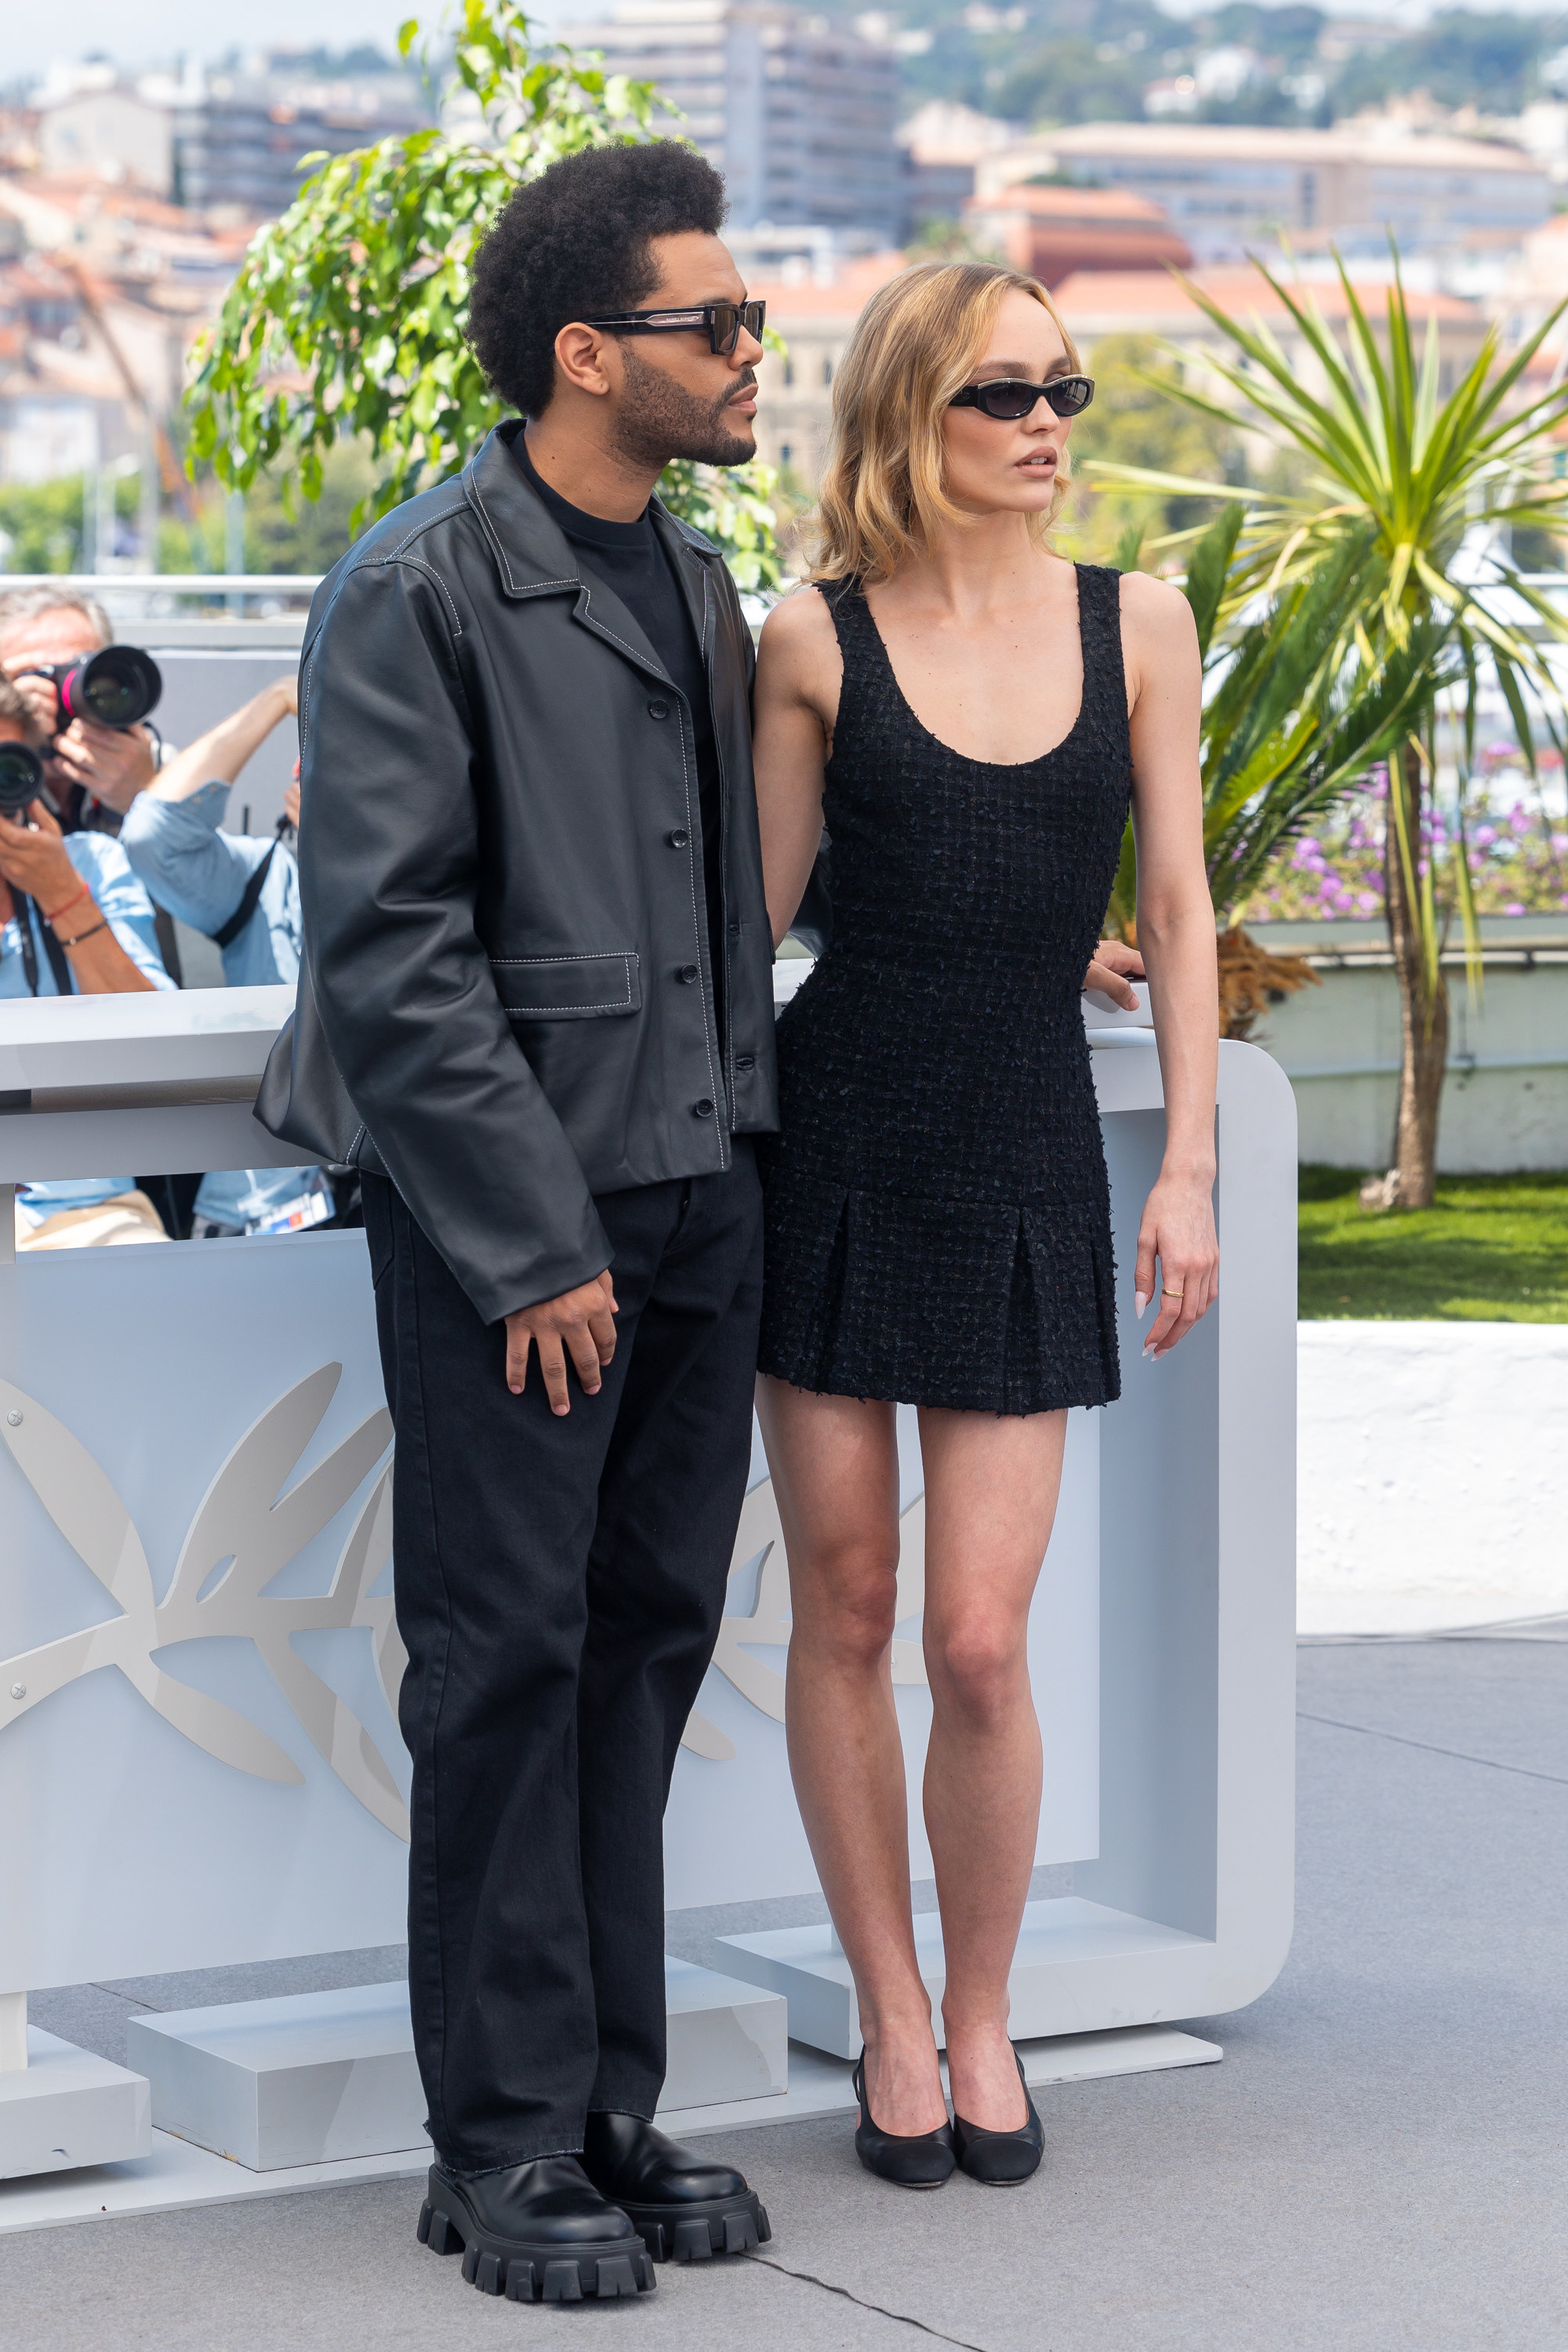 Abel and Lily-Rose in Cannes